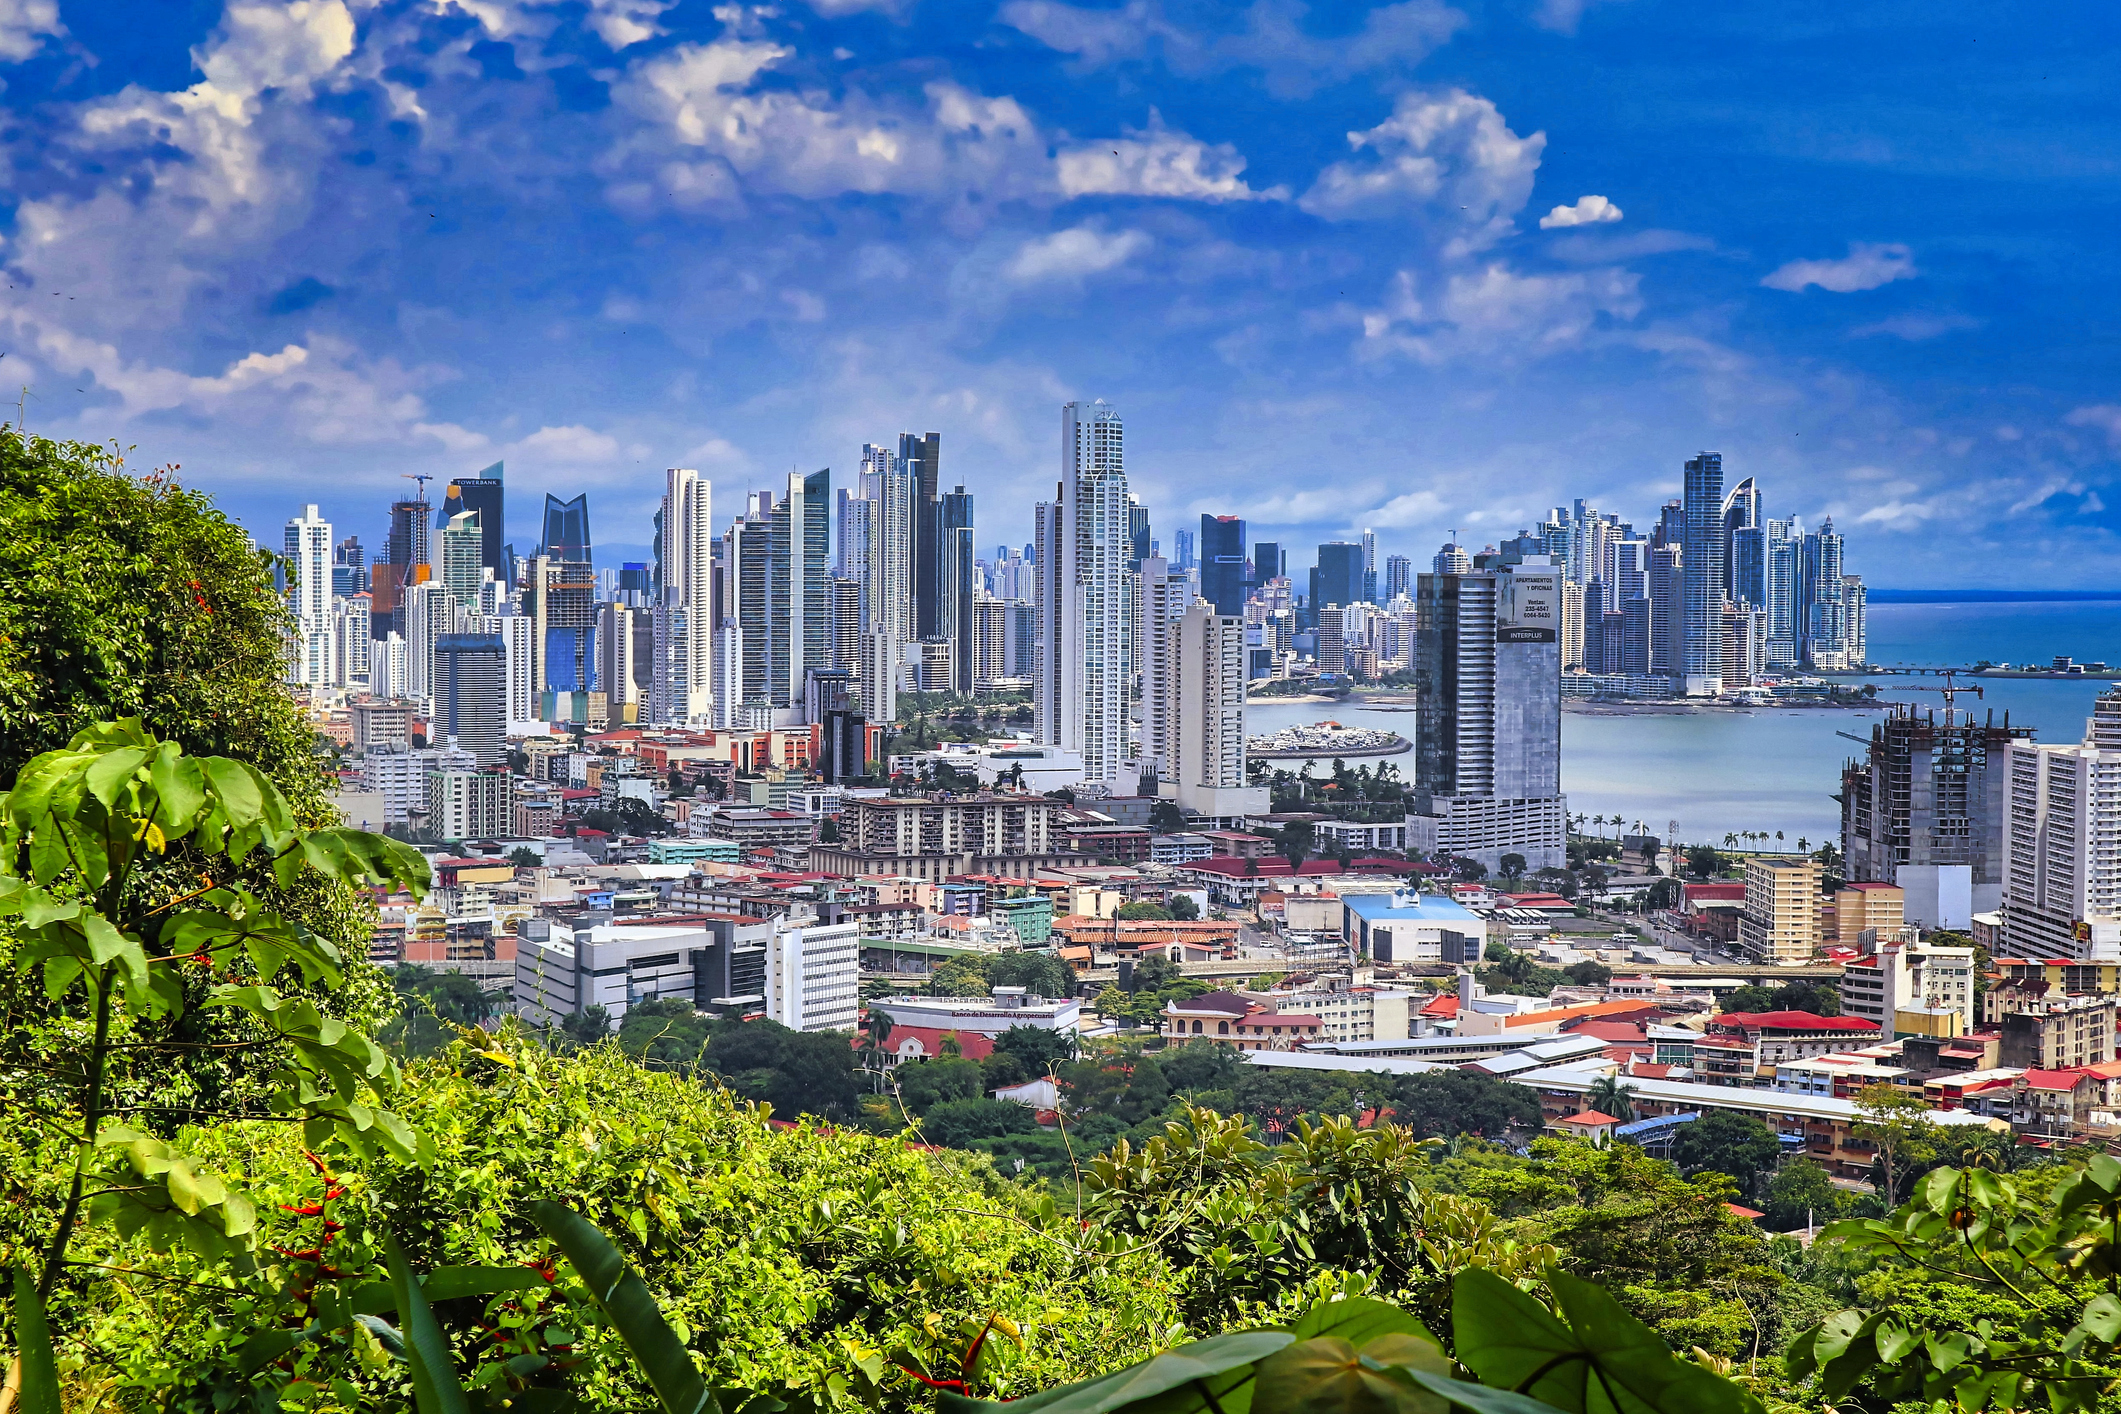 How Safe is it in Panama?